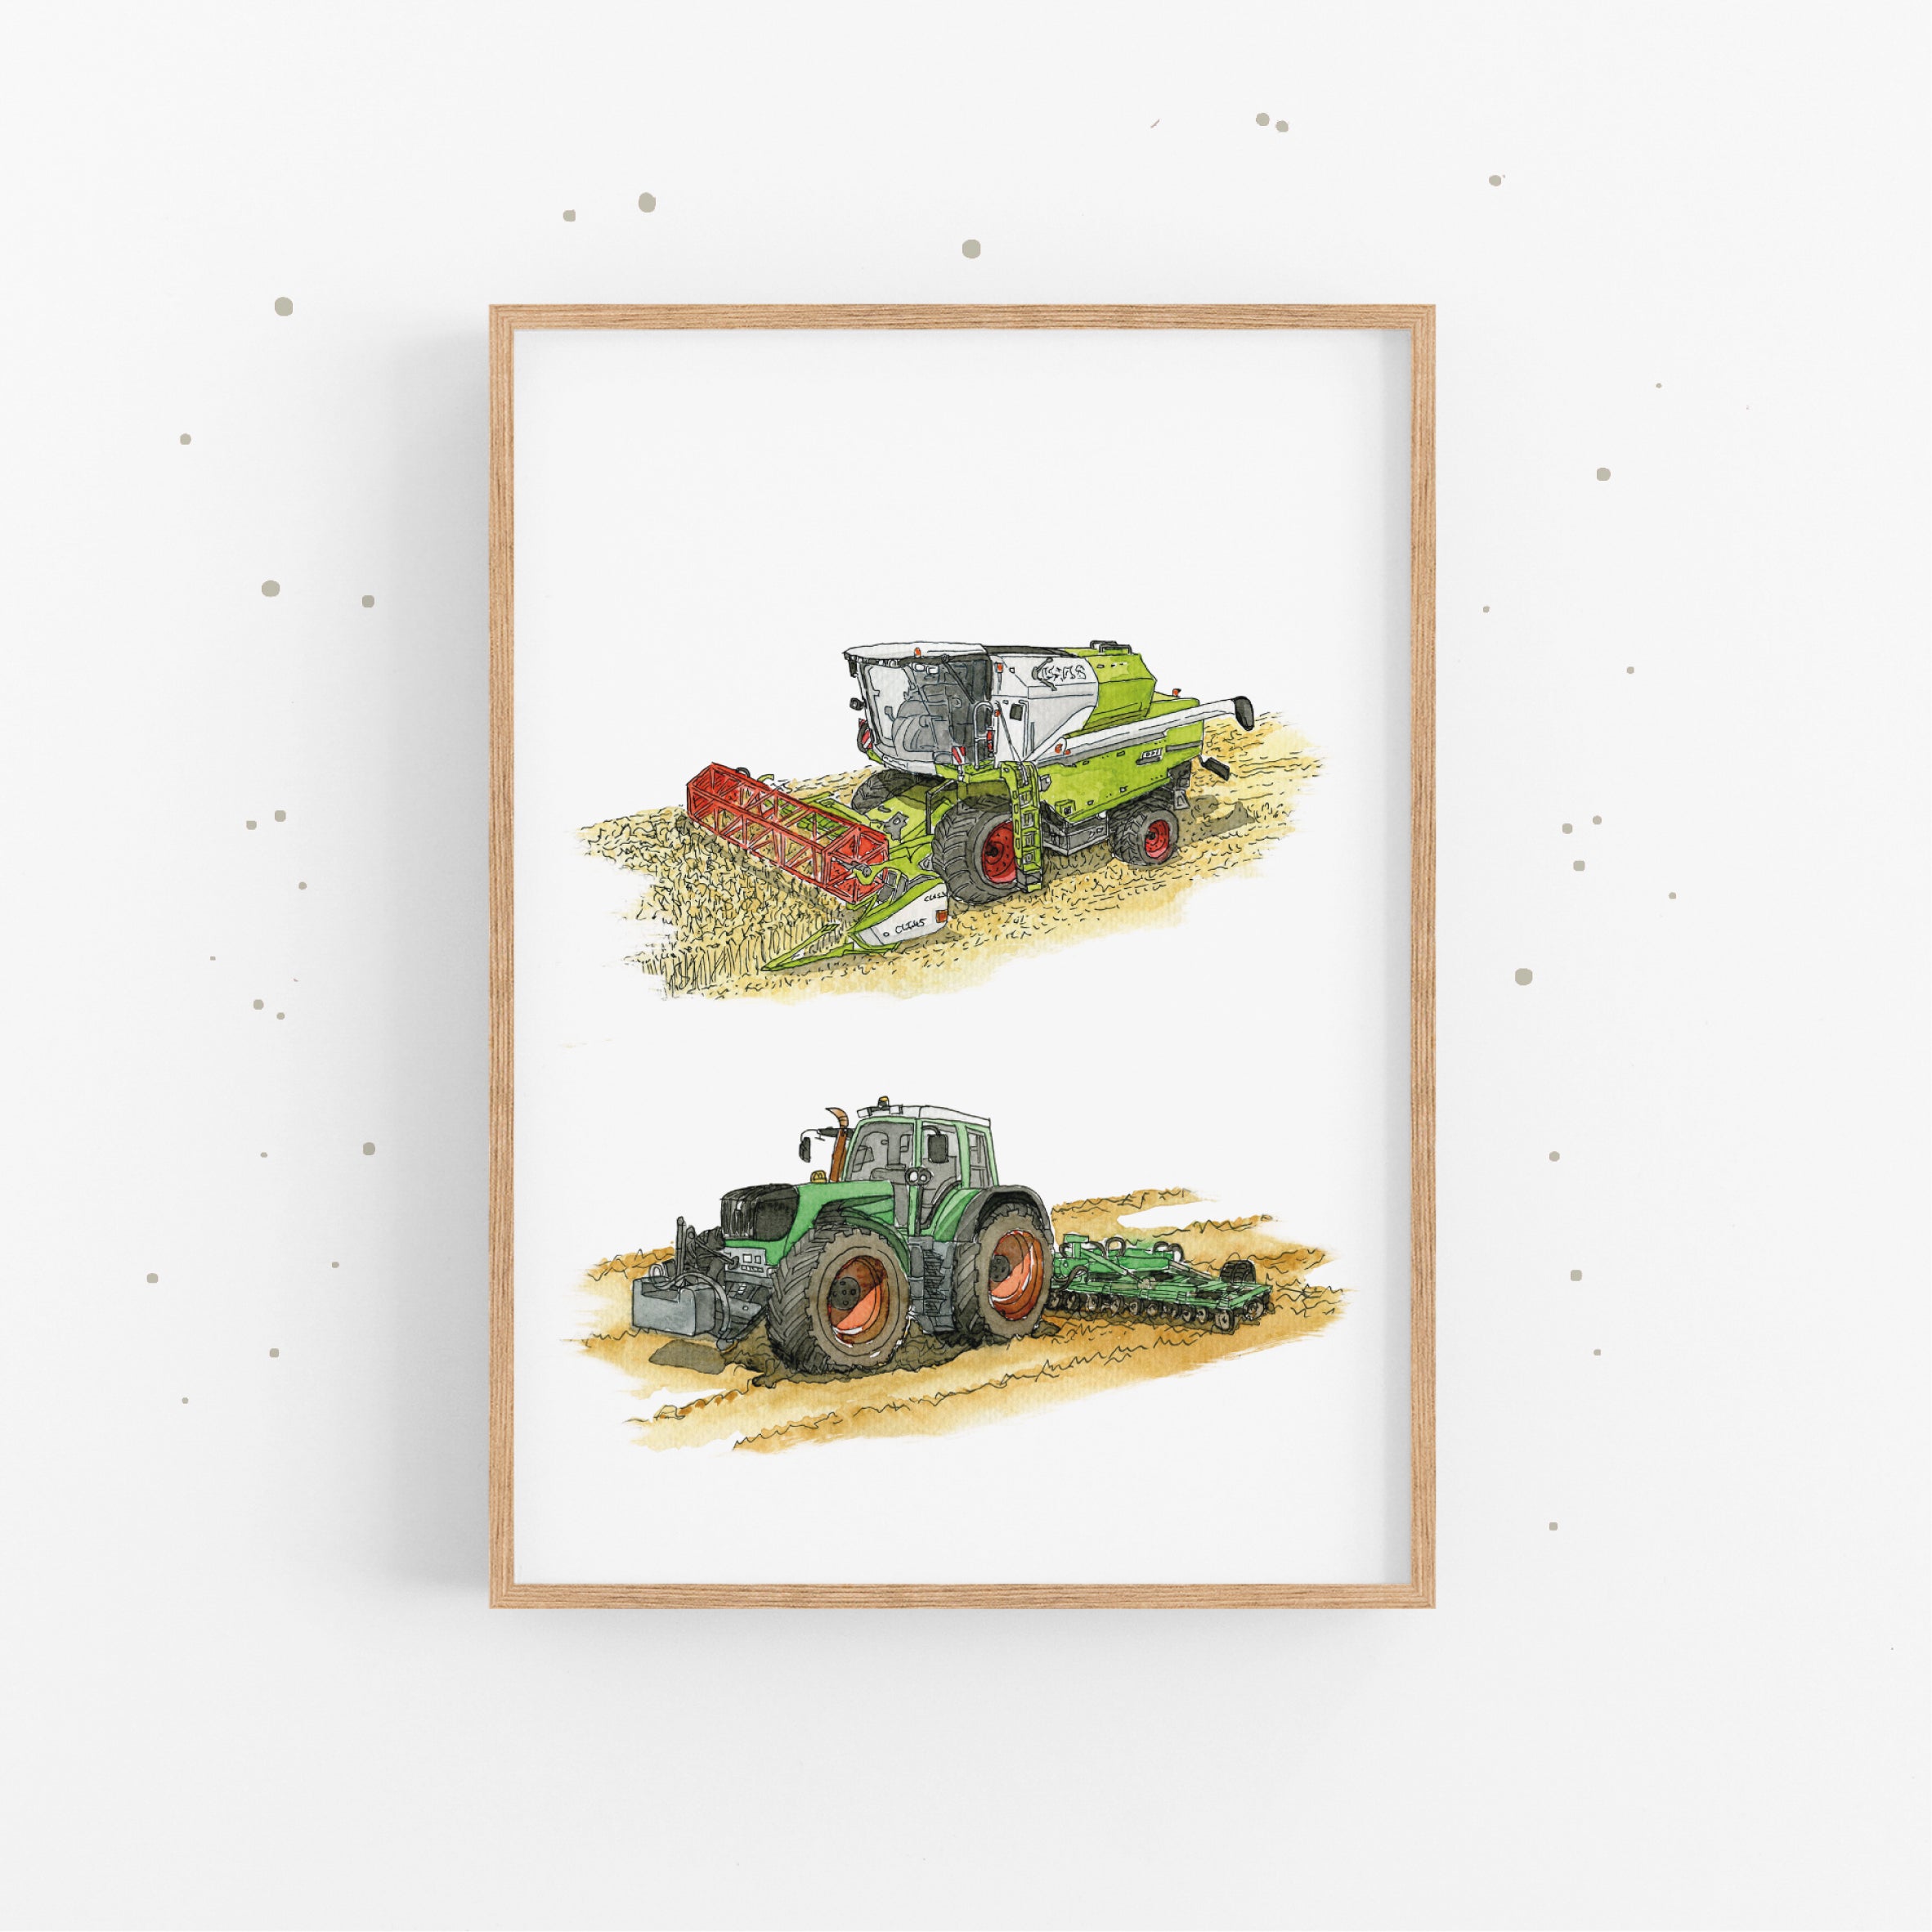 Vehicle Poster - Tractor and Combine Harvester | Picture for the children's room | gift idea